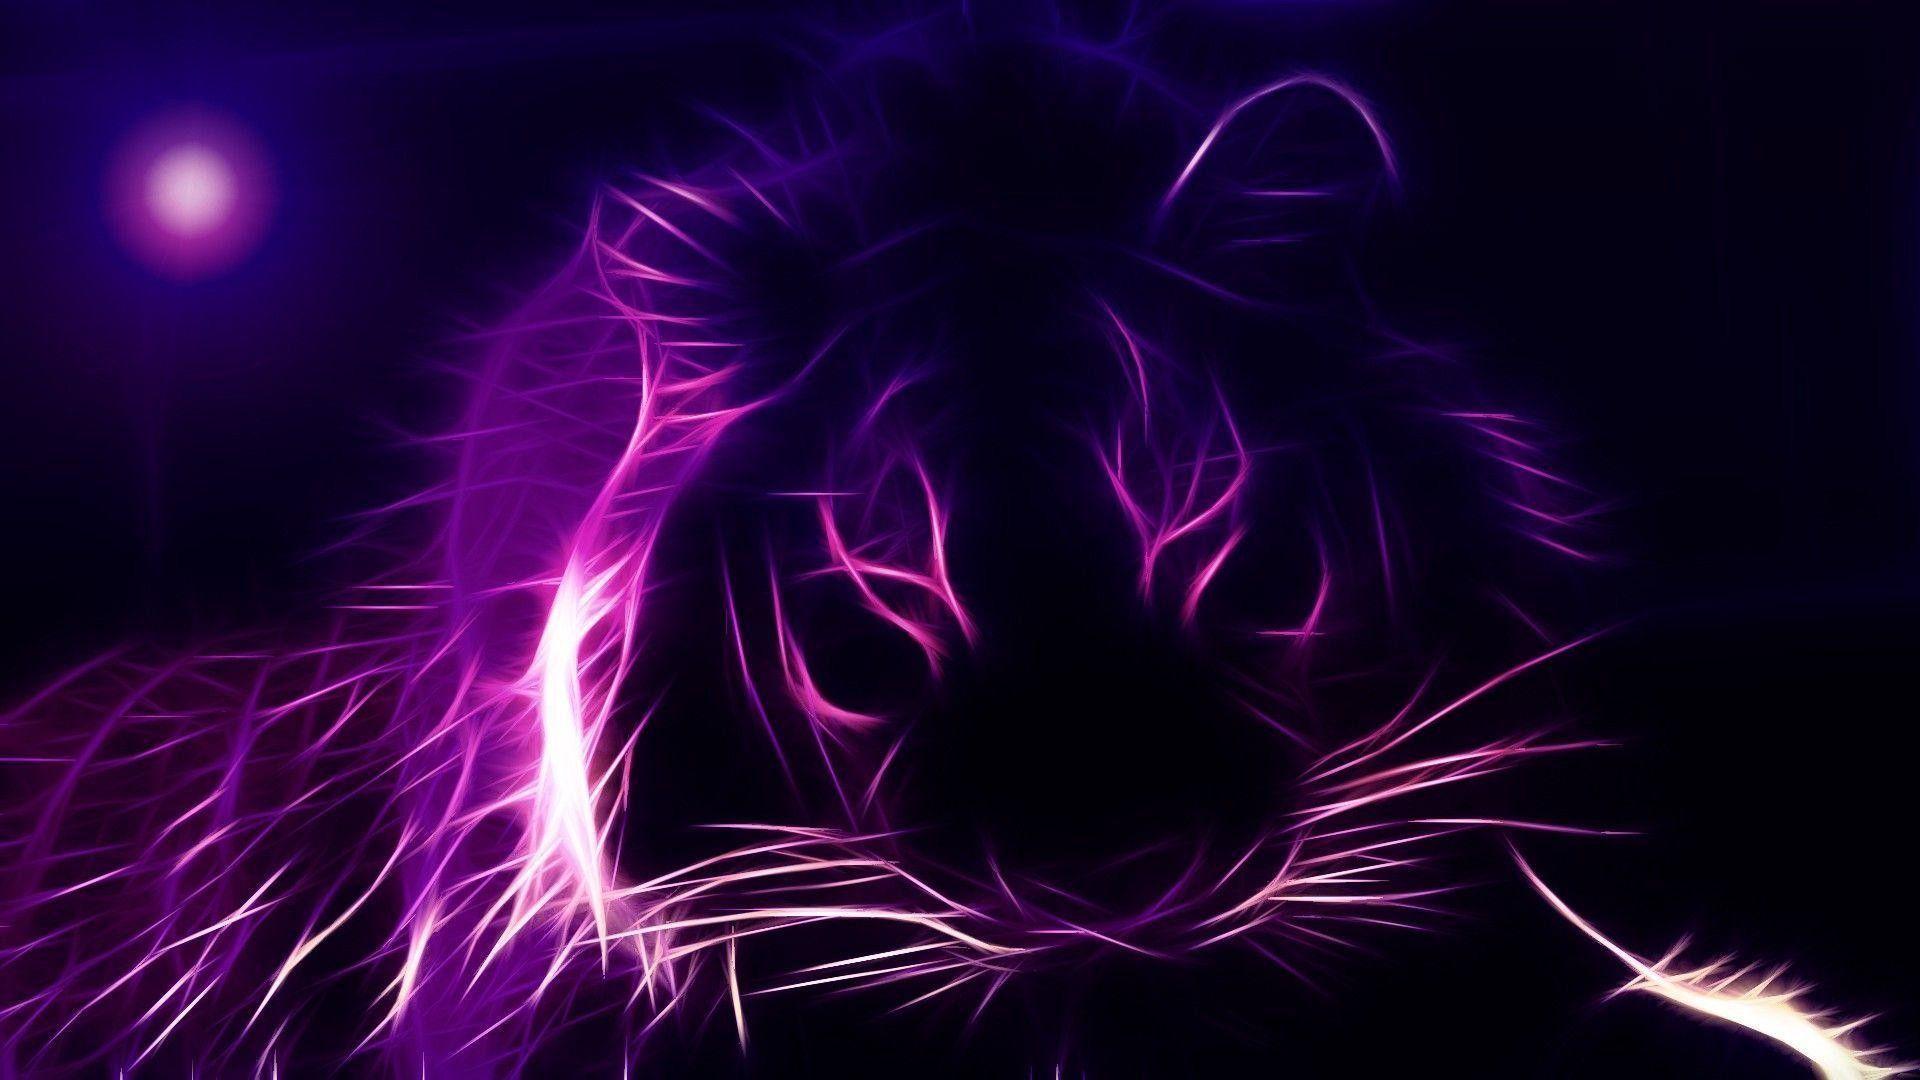 Royalty Free Purple Particles Background HD 1080p  YouTube